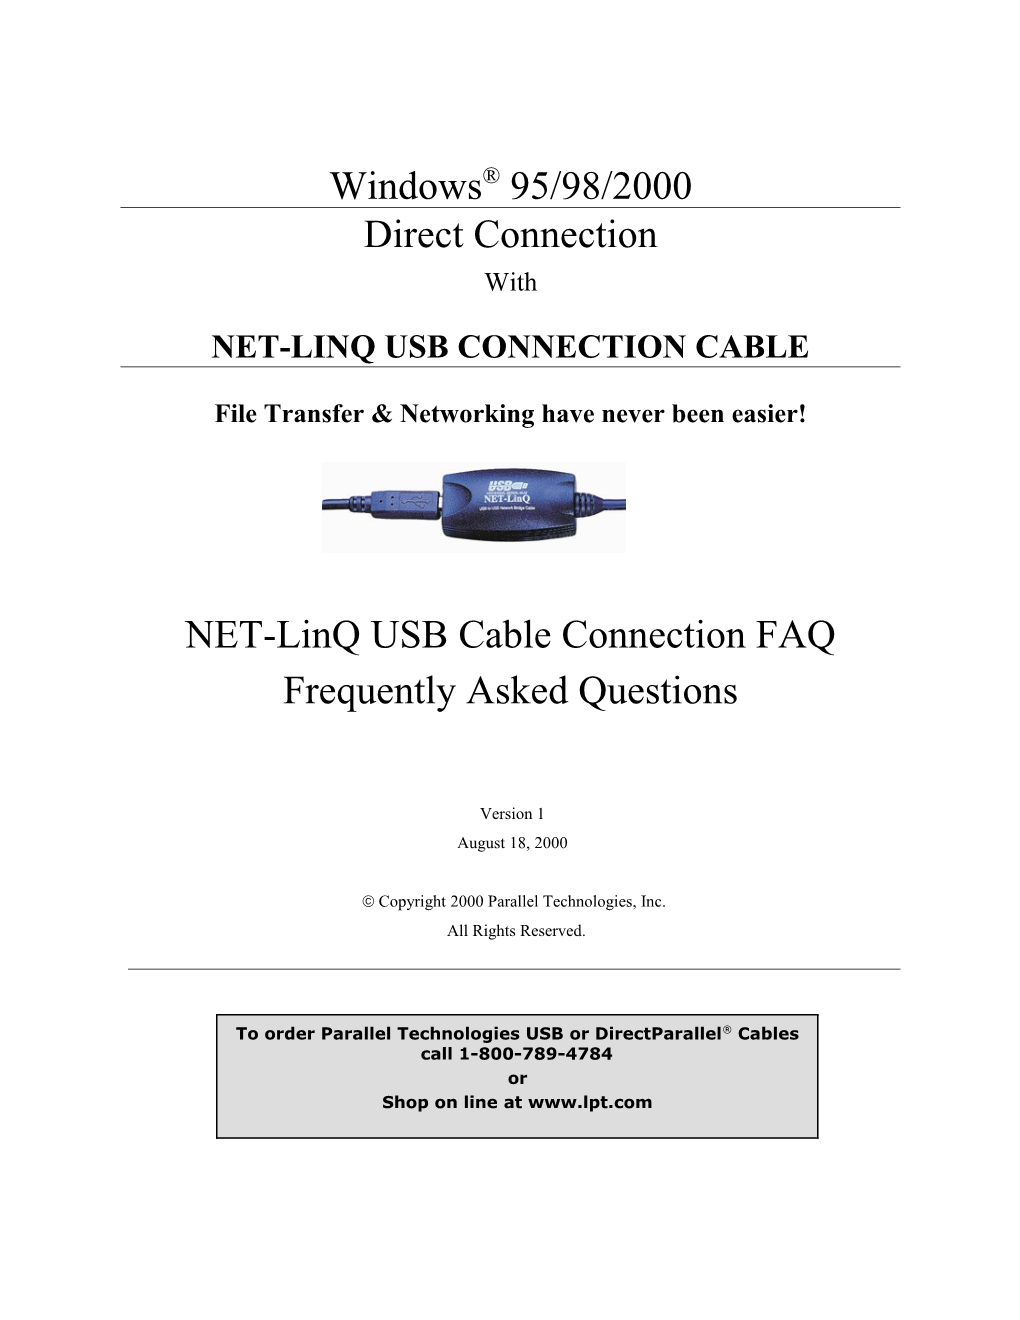 Usb Connection Cable Faq Index